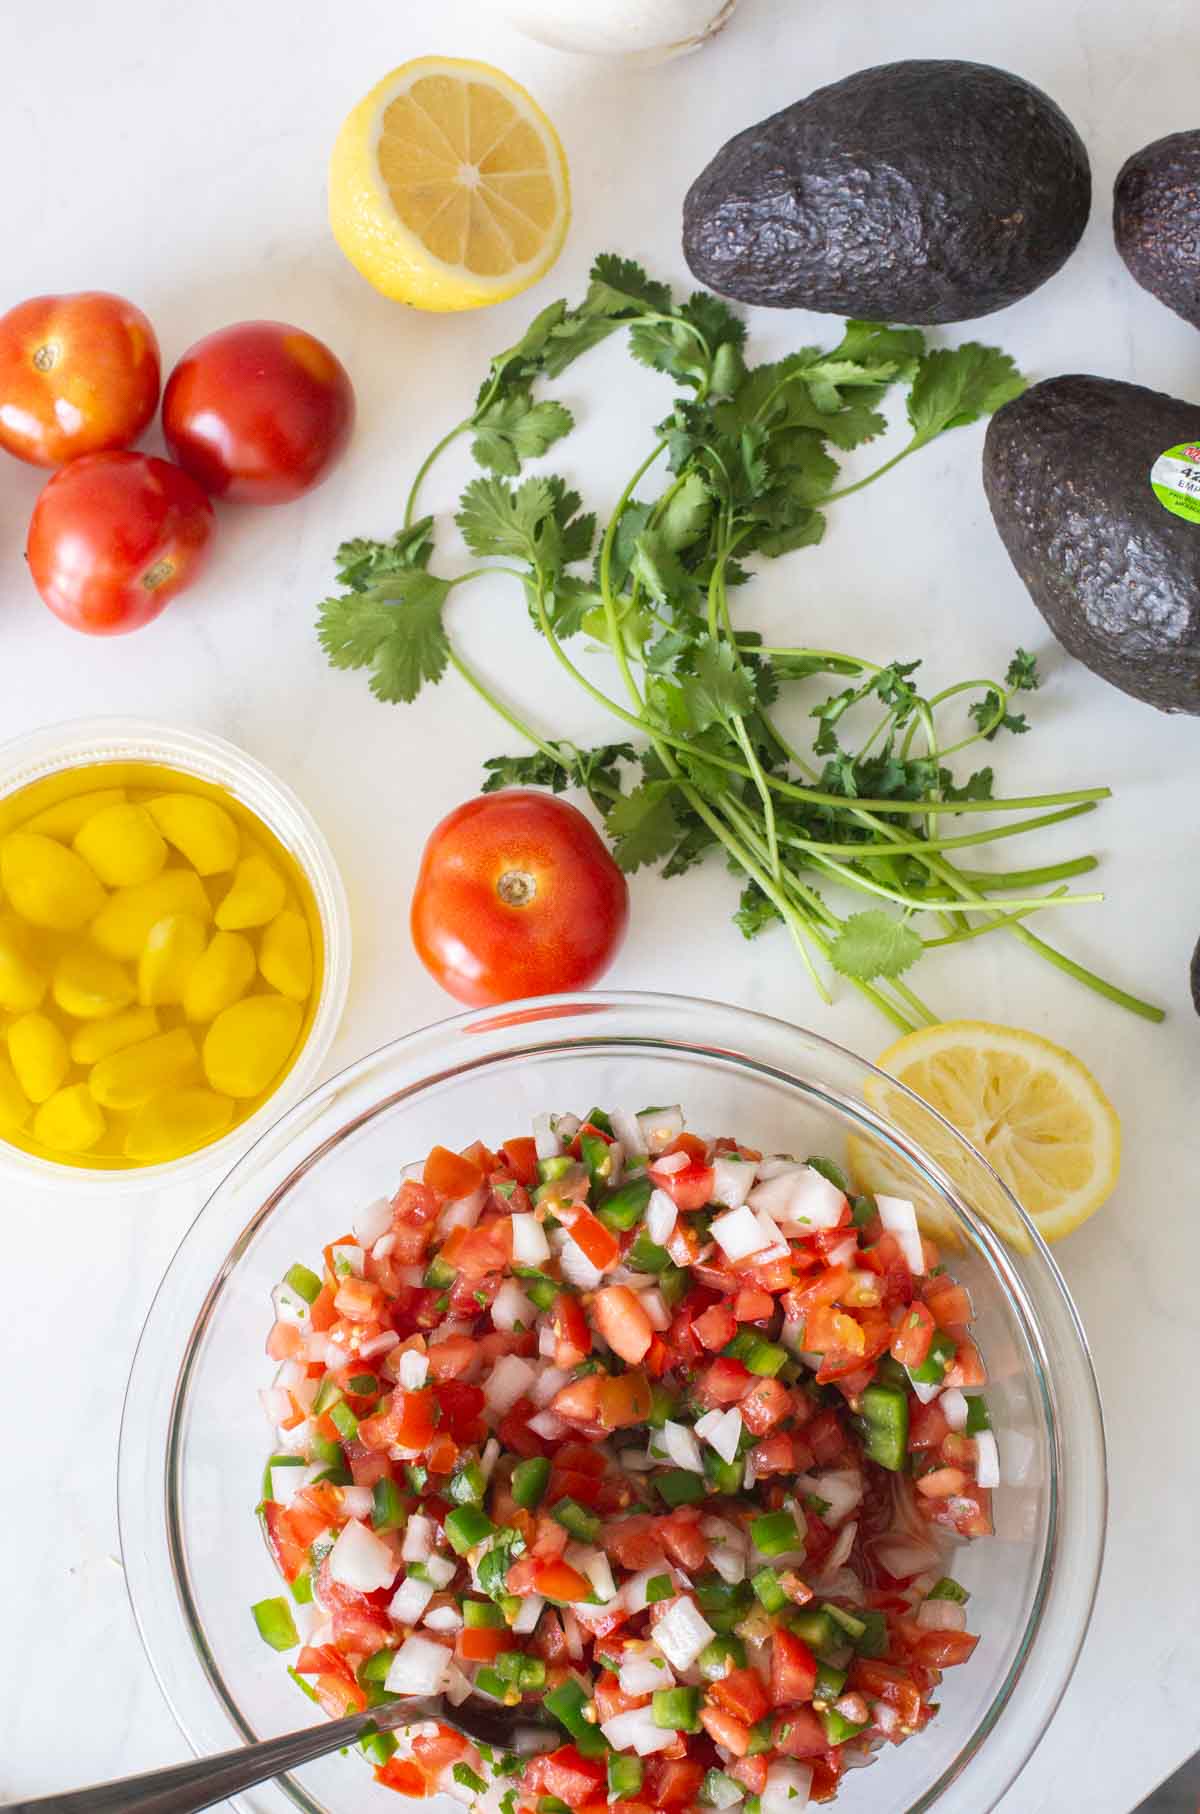 top down view of pico de gallo in a glass bowl with a spoon and tomatoes, lemons, cilantro and avocados in the background